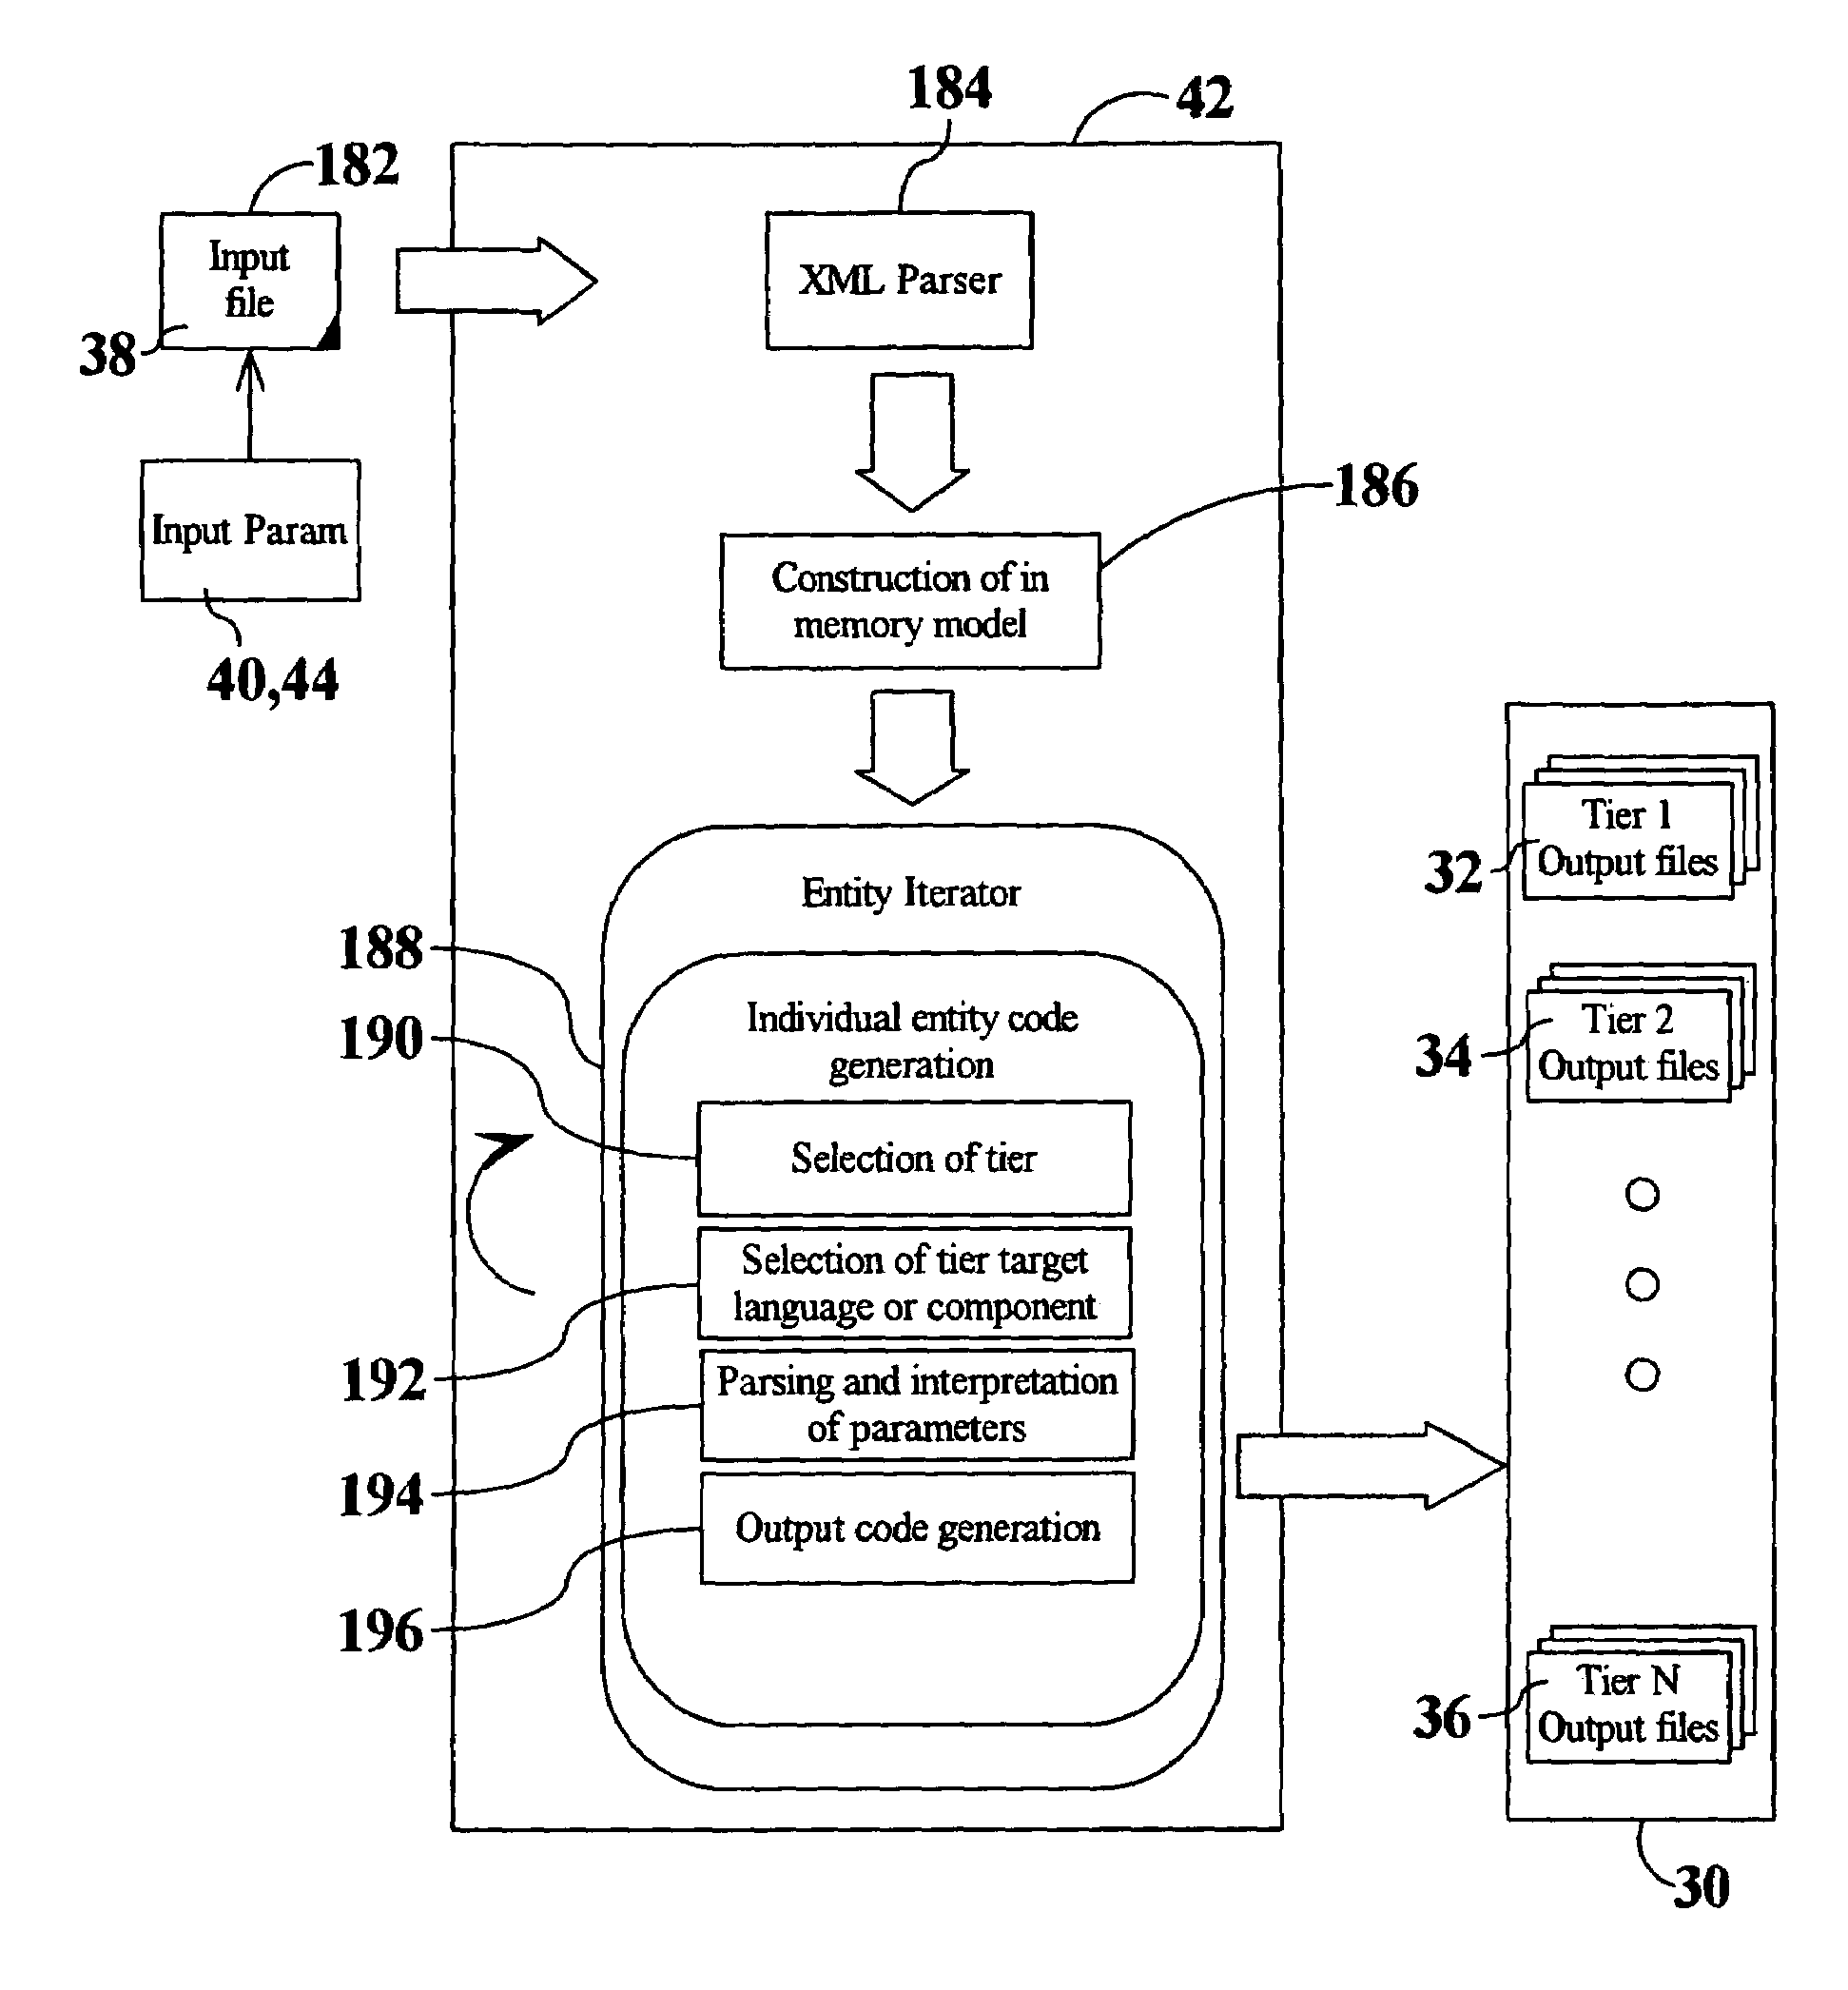 System and method for multiple level architecture by use of abstract application notation